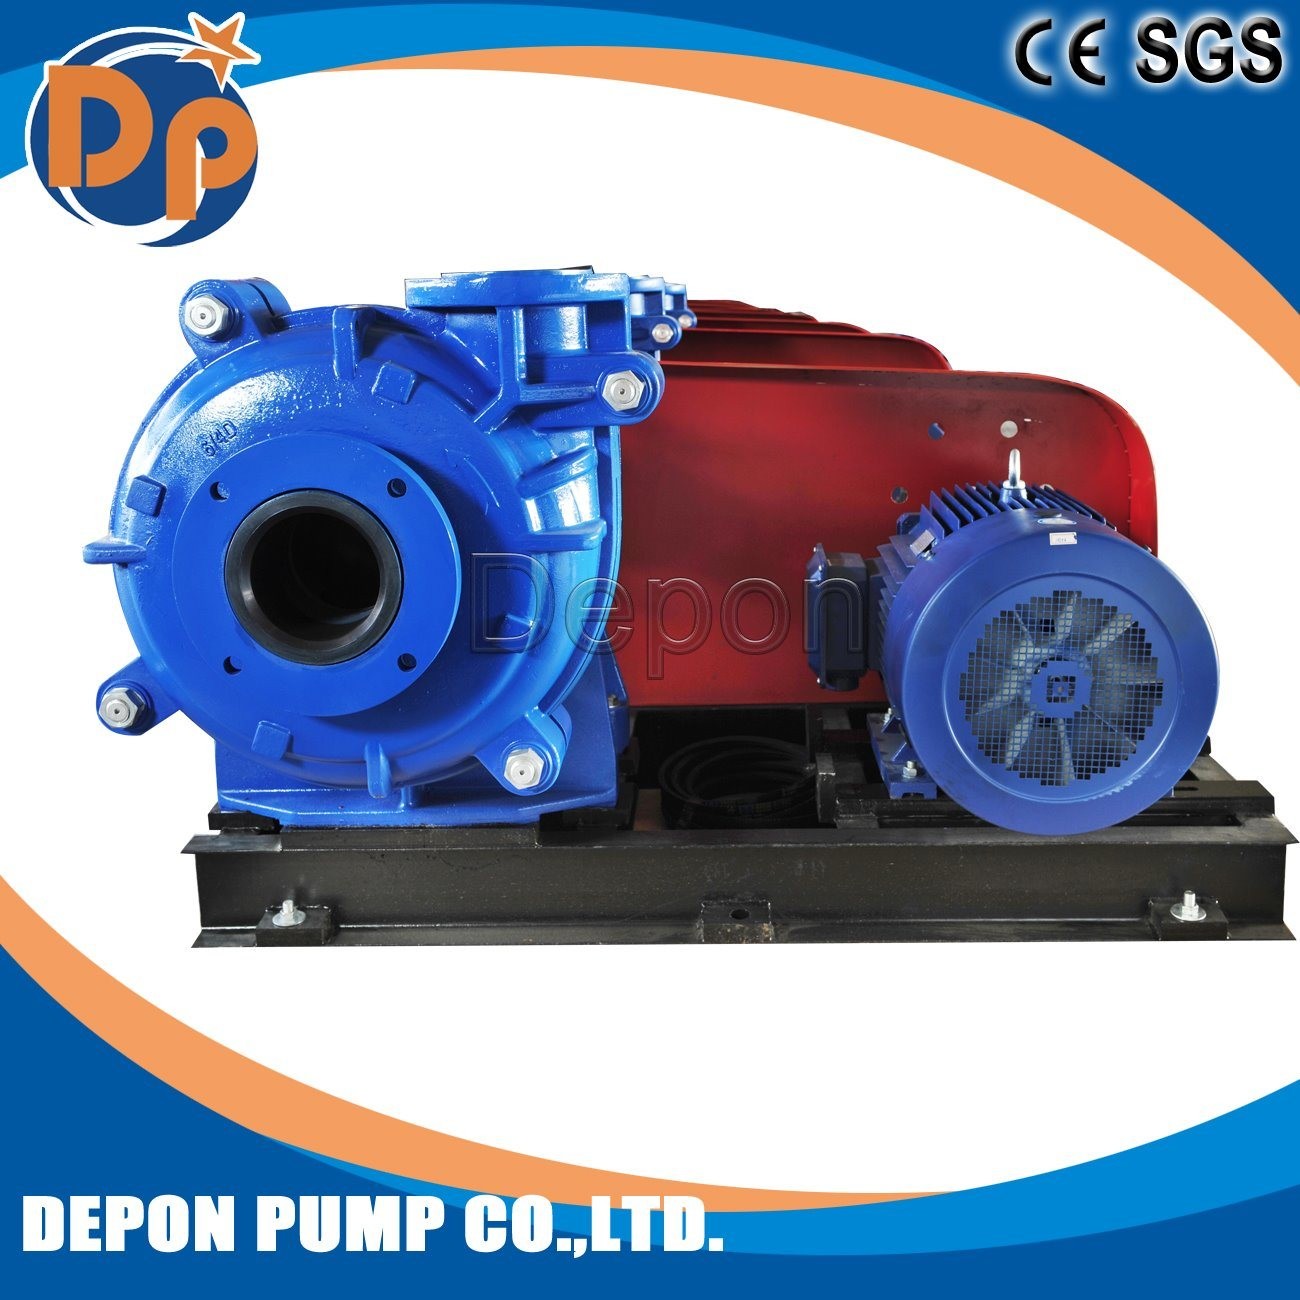 Pump to Suck Mud and Sand Water, Sewage Ejector Usage and Single Stage Structure Centrifugal Slurry Pump